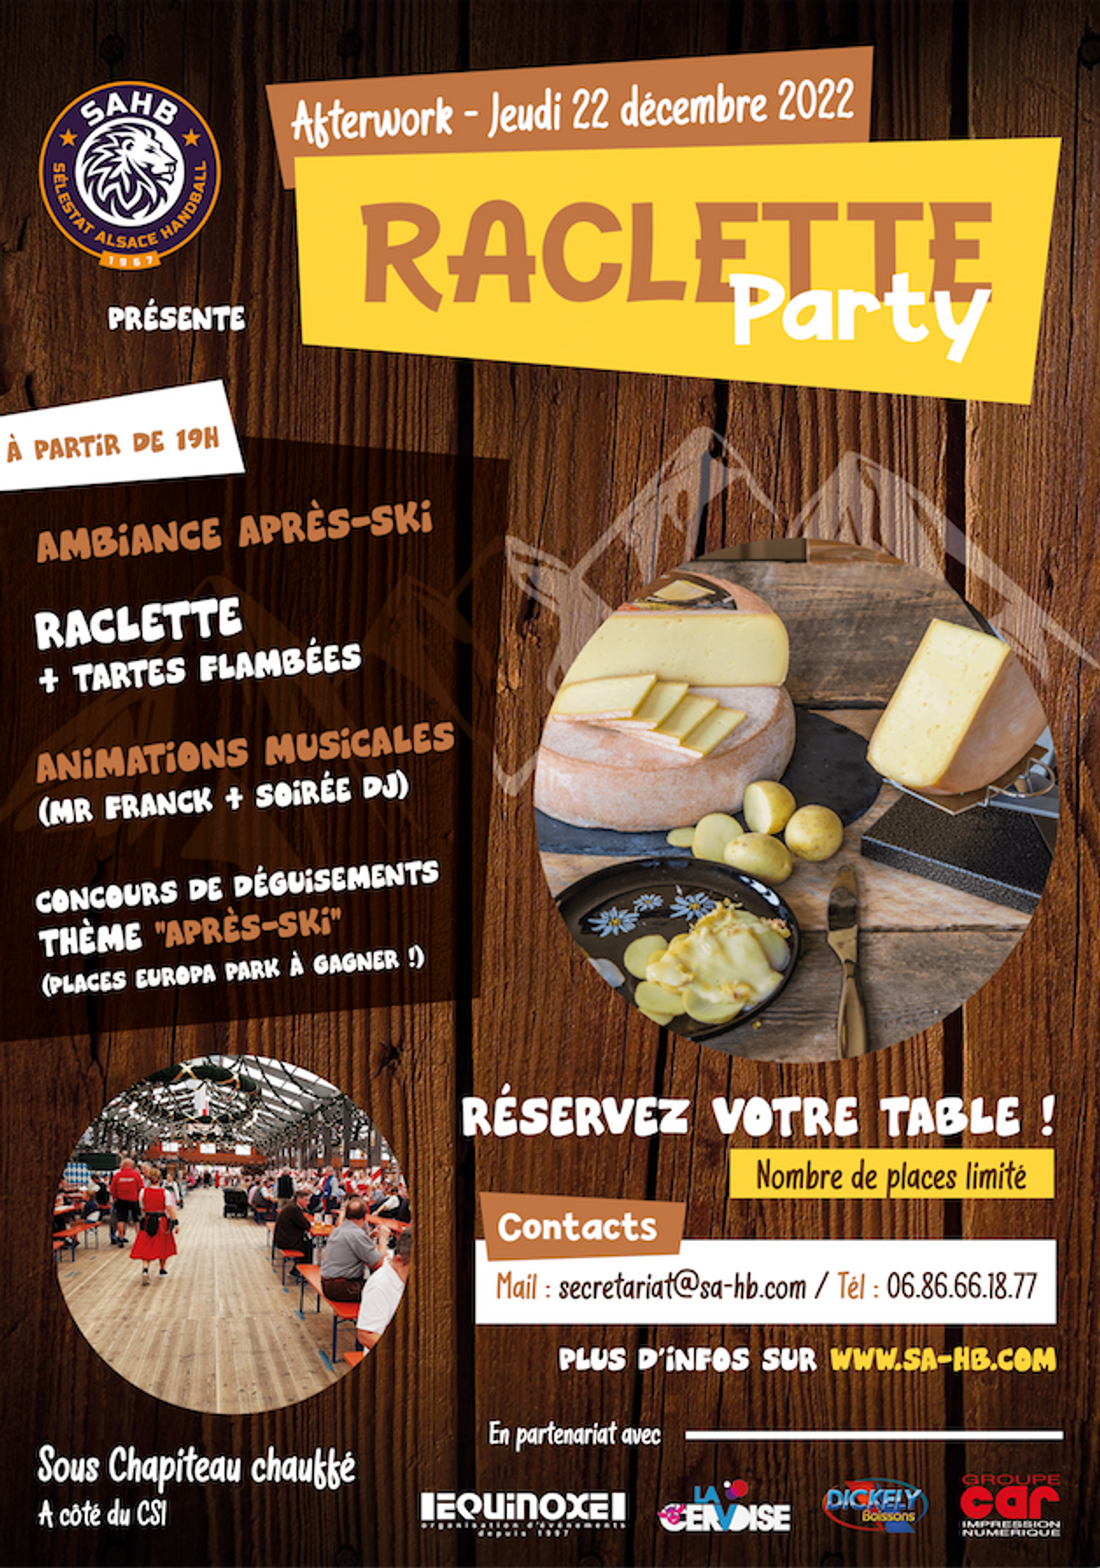 RACLETTE PARTY BY SAHB